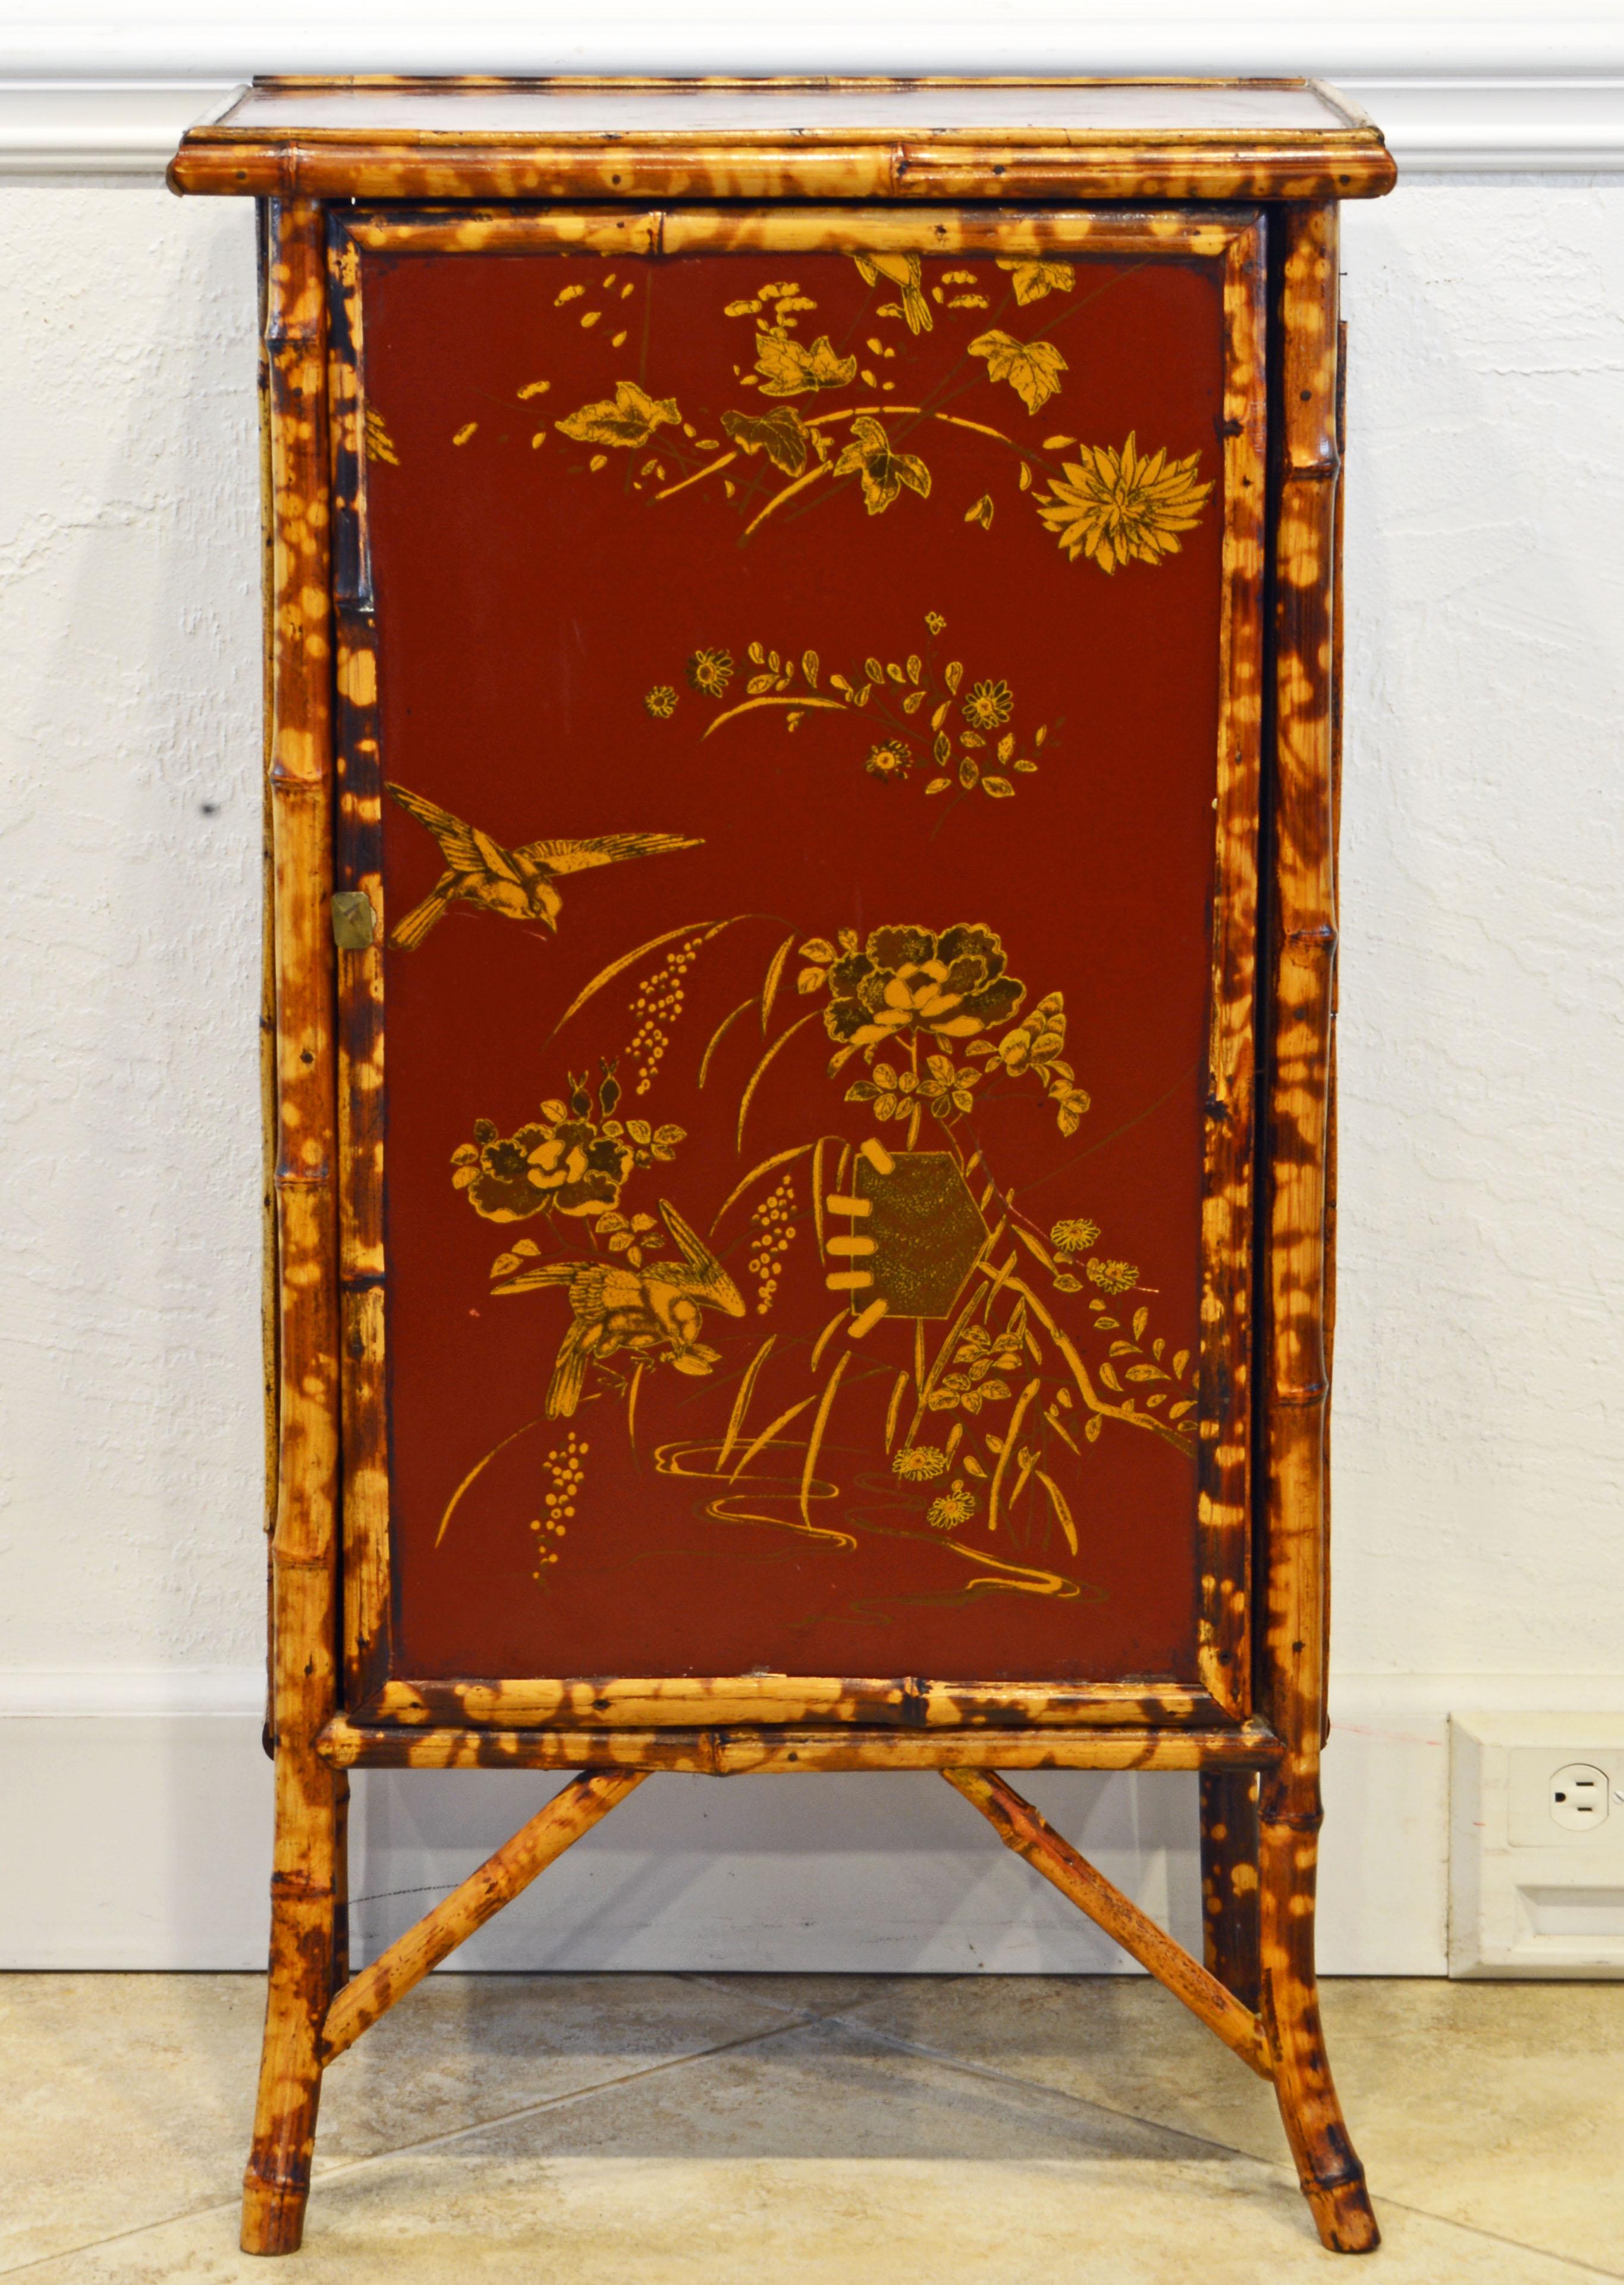 This late 19th century English bamboo and red lacquer cabinet features elaborate chinoiserie gilt decorations on the top, front and sides. The door opens up to a shelved interior and the cabinet rests on four slightly splayed bamboo legs.